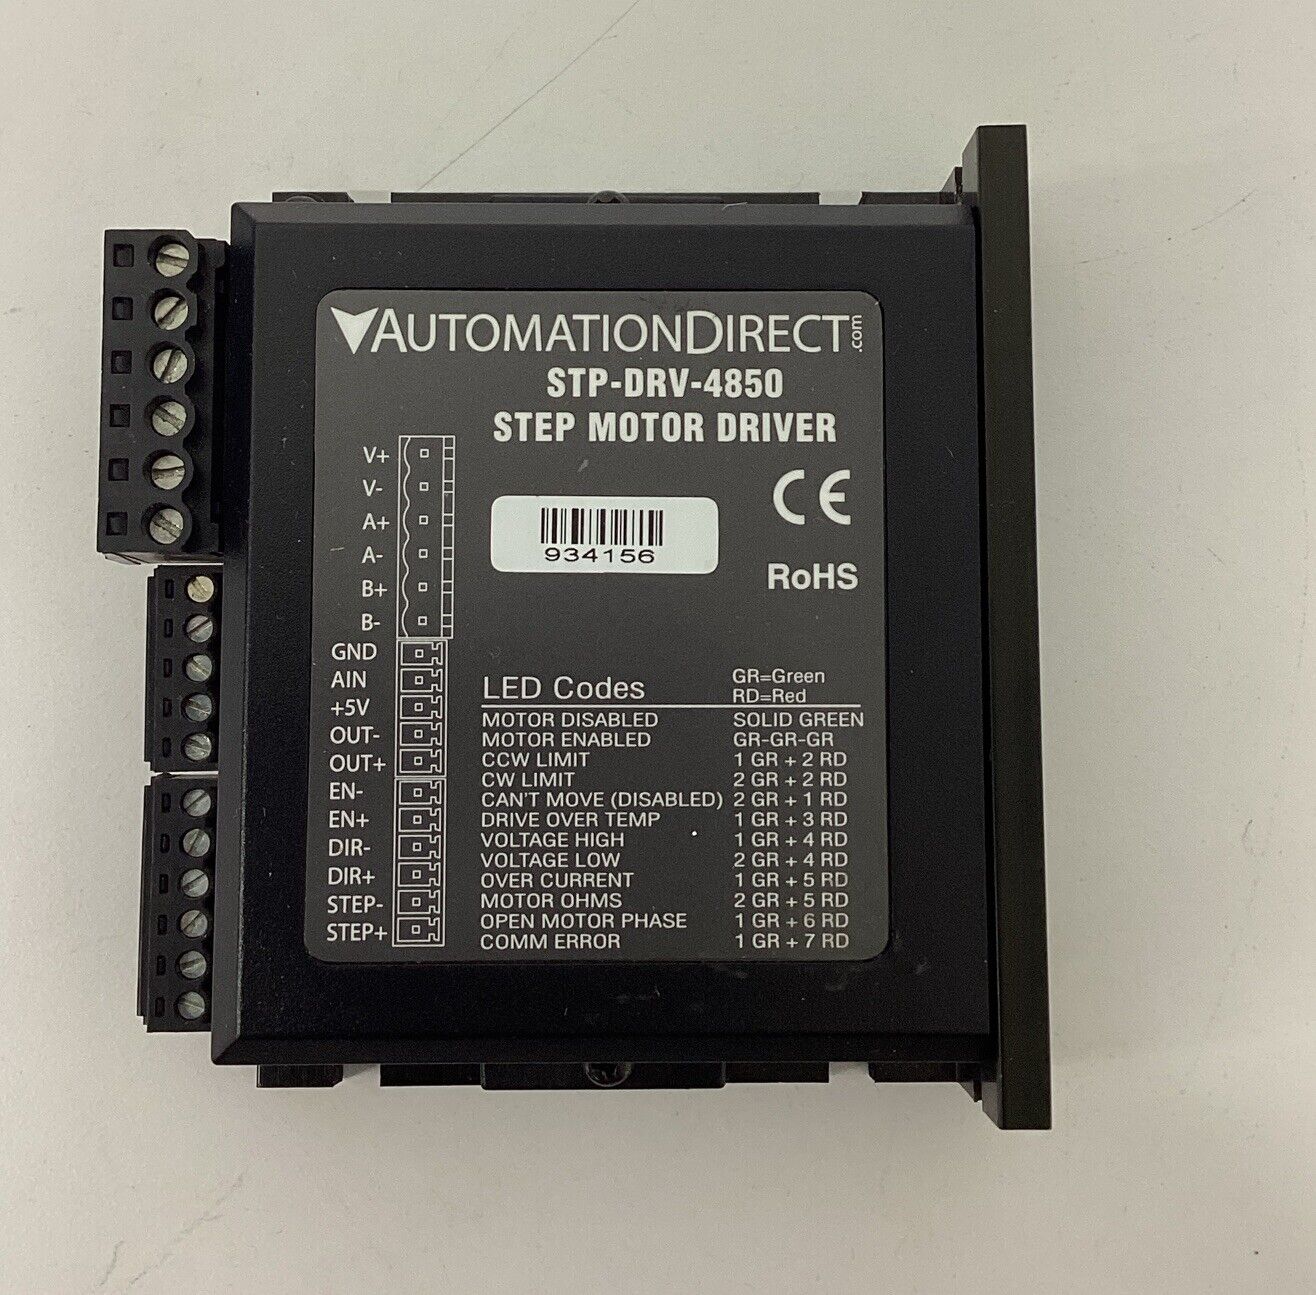 Automation Direct STP-DRV-4850 Step Motor Driver (RE155)